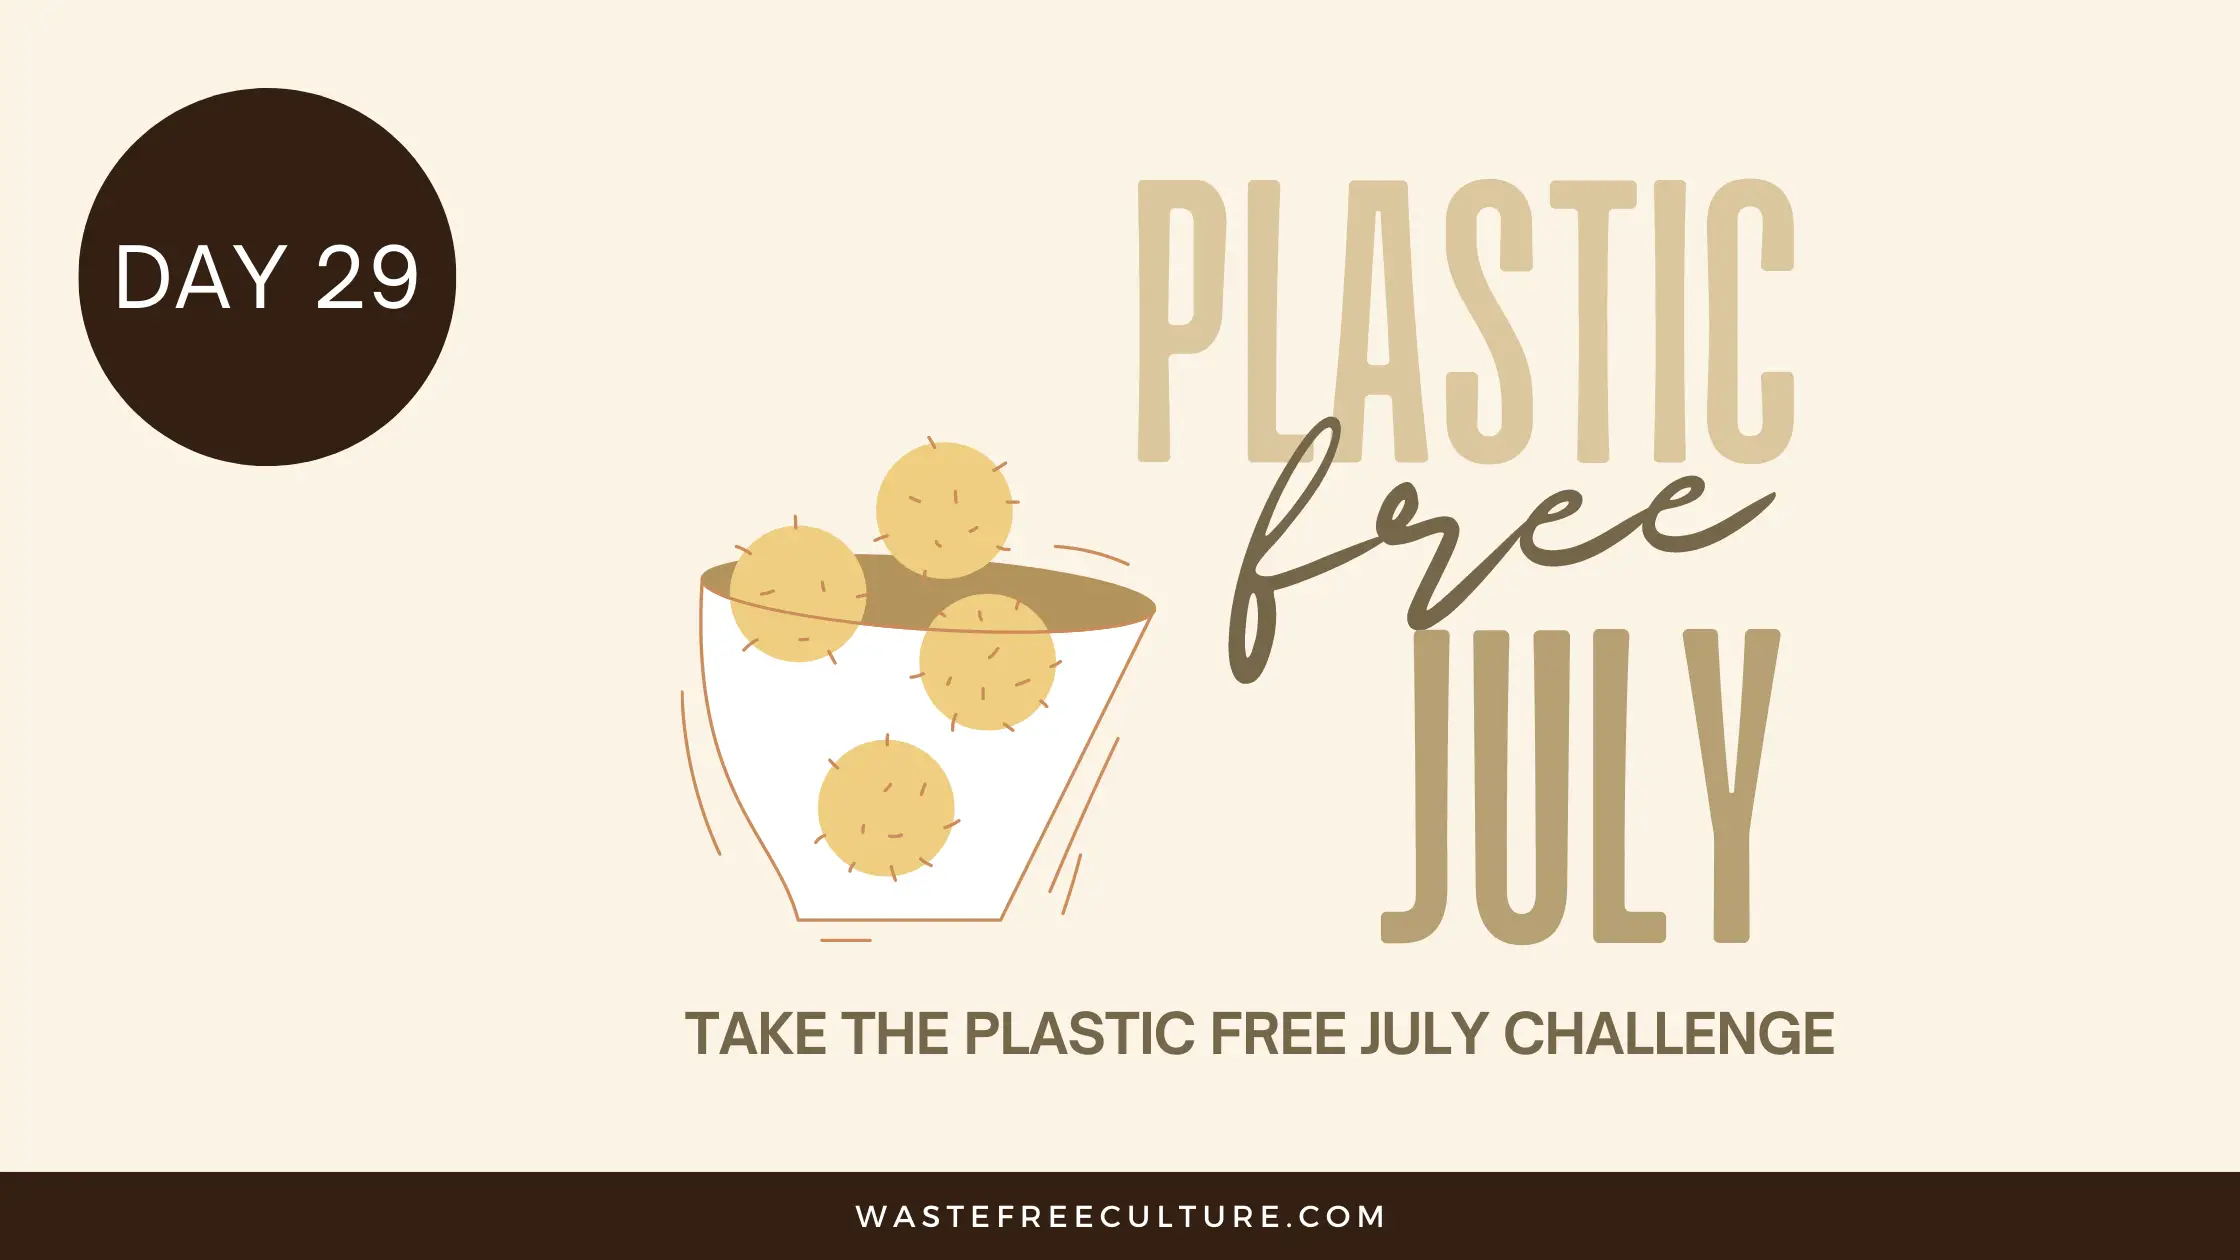 Day 29 of the Plastic Free July Challenge